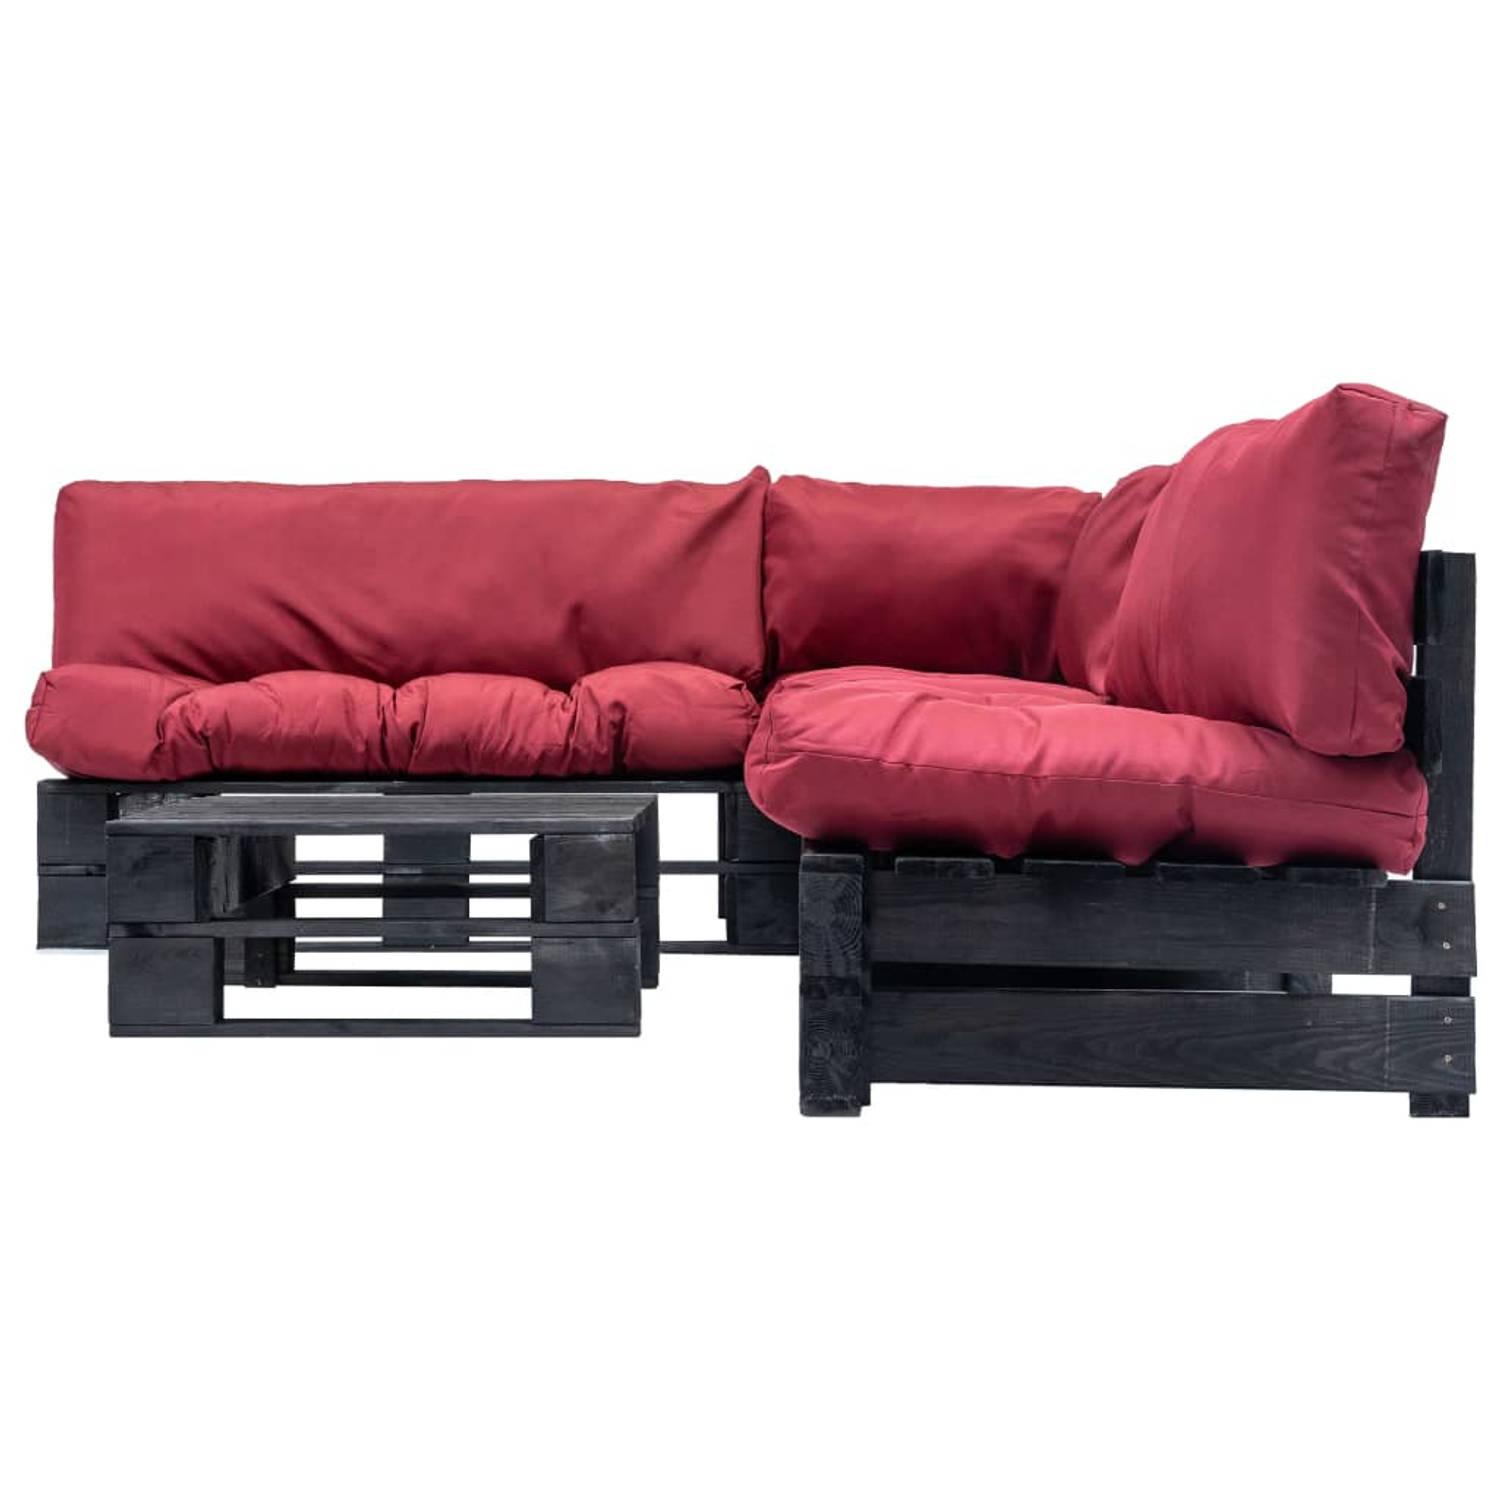 The Living Store Loungeset Pallet Grenenhout - 220x176x65 cm - Rood